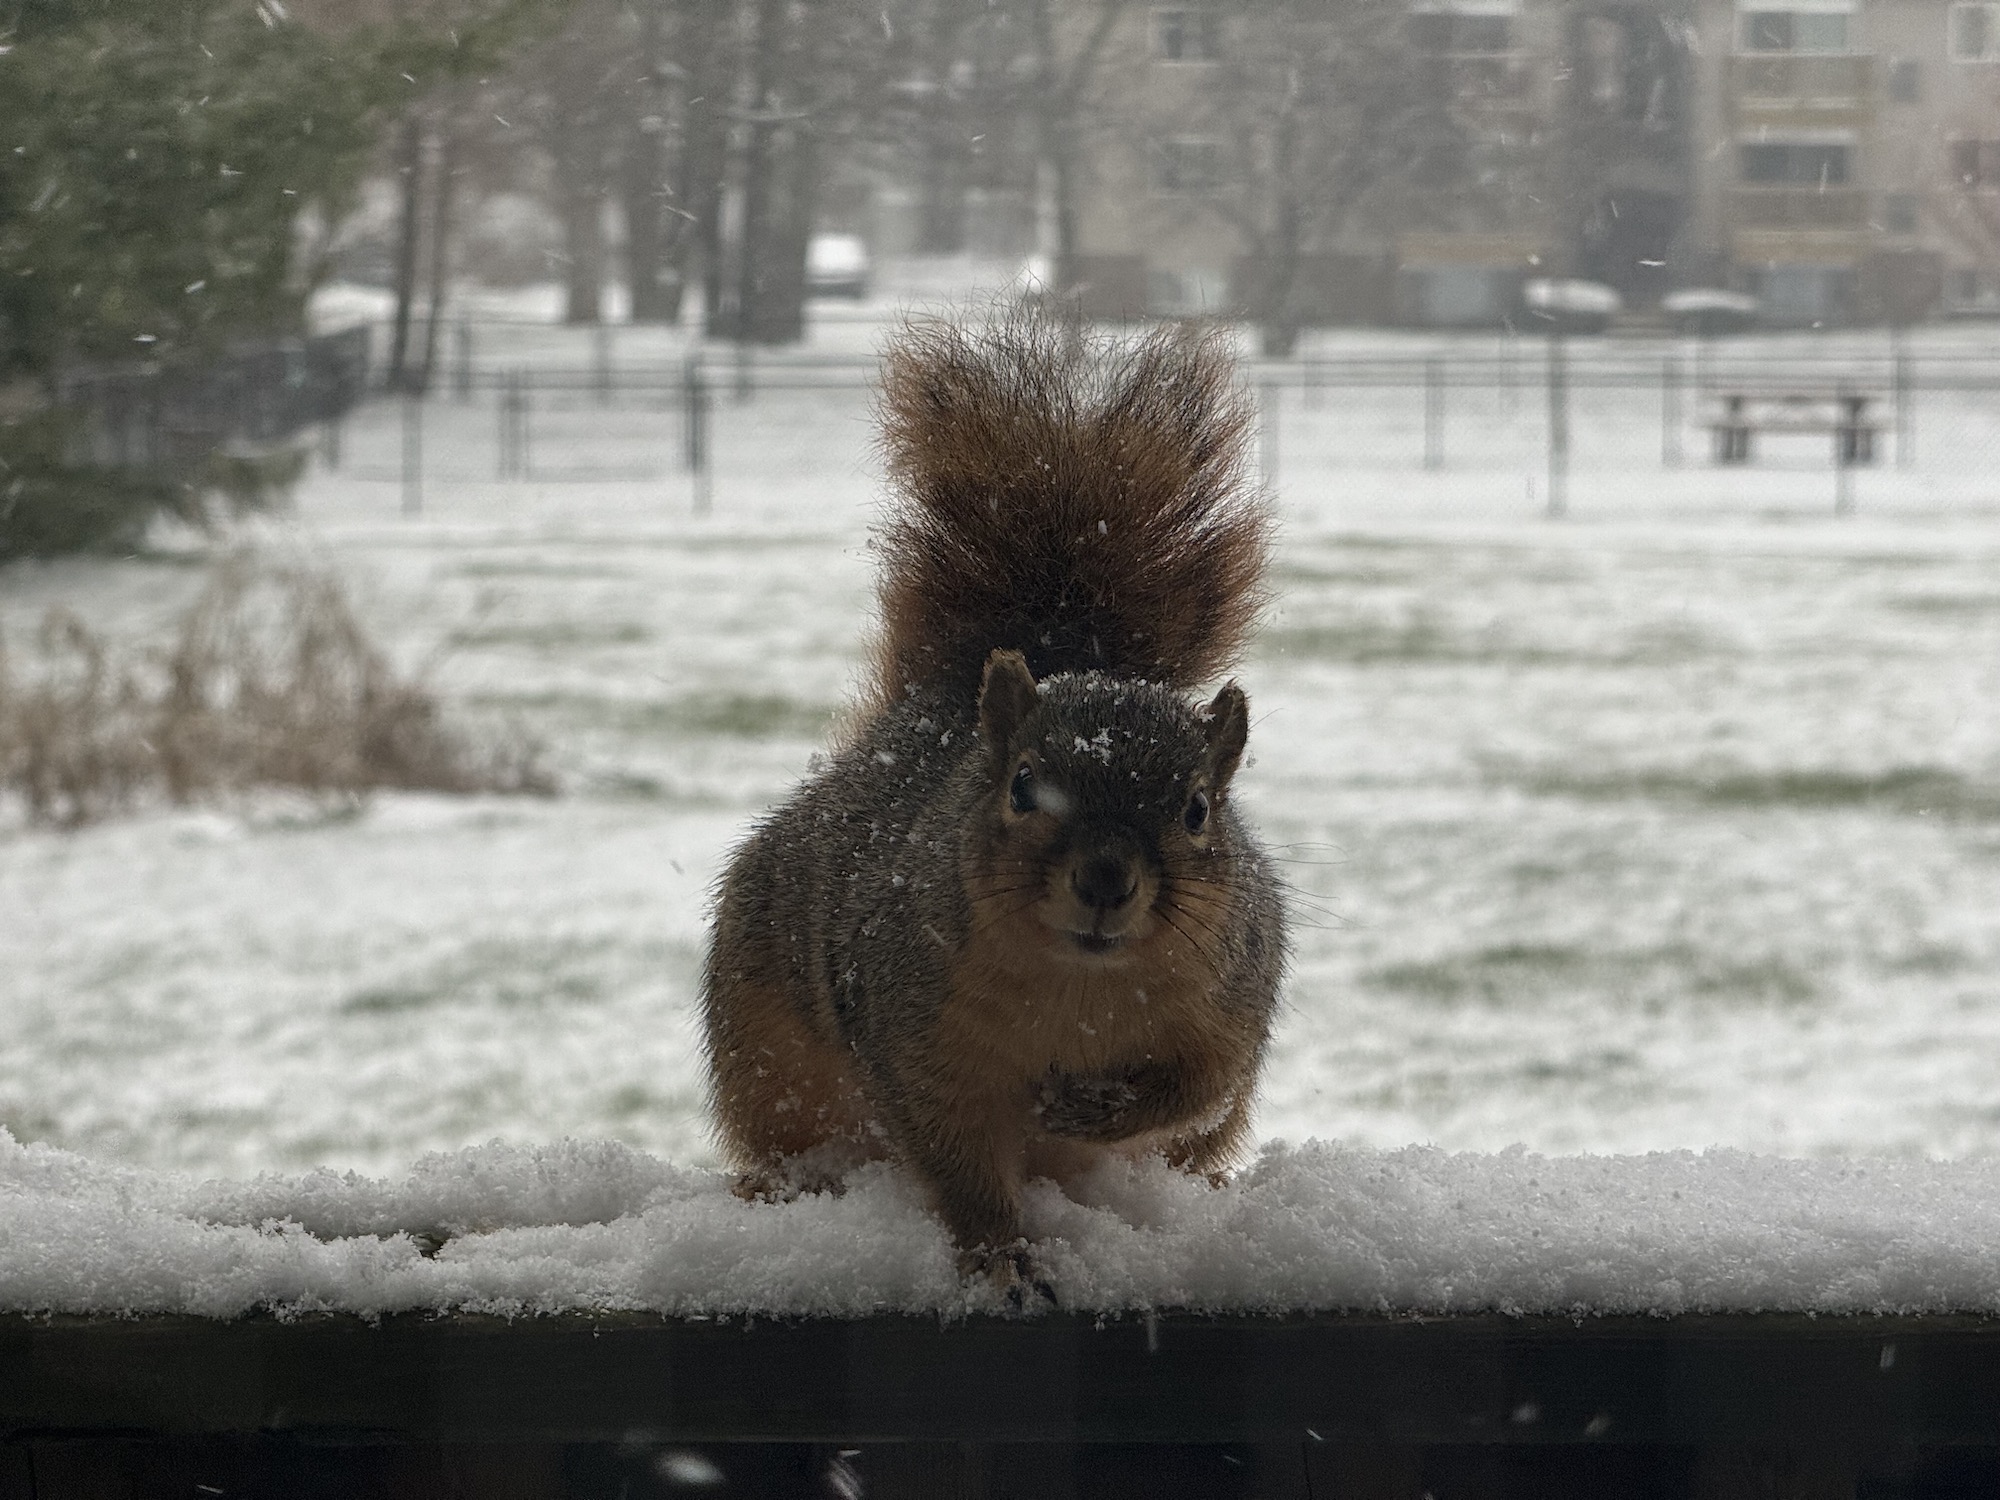 A photo of a squirrel sitting outside in the snow, taken with the iPhone 15 Pro Max.